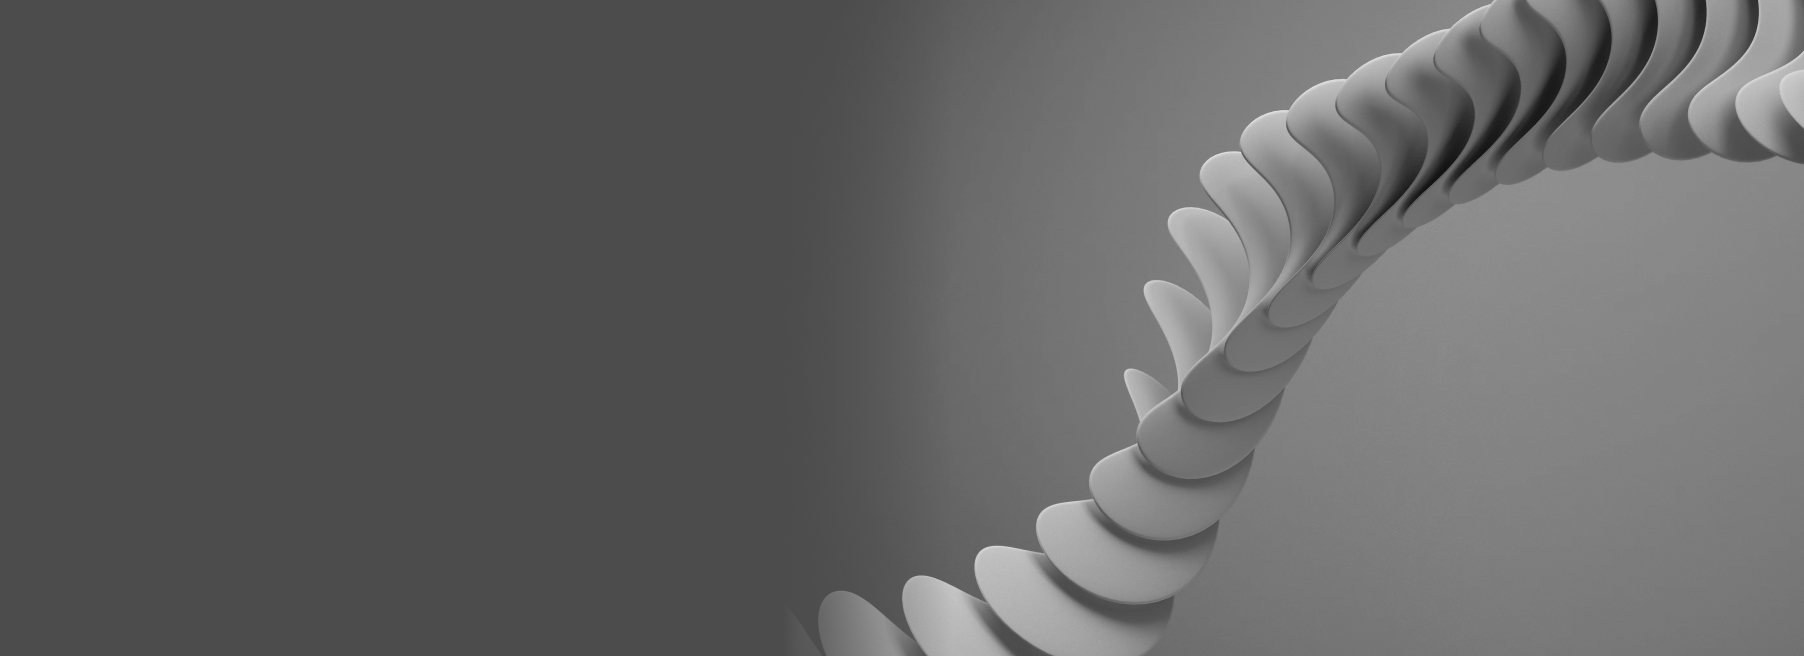 3D abstract shape flowing in an S-curve made out of thin curved and rounded sheets. Roughly looks like a spine.